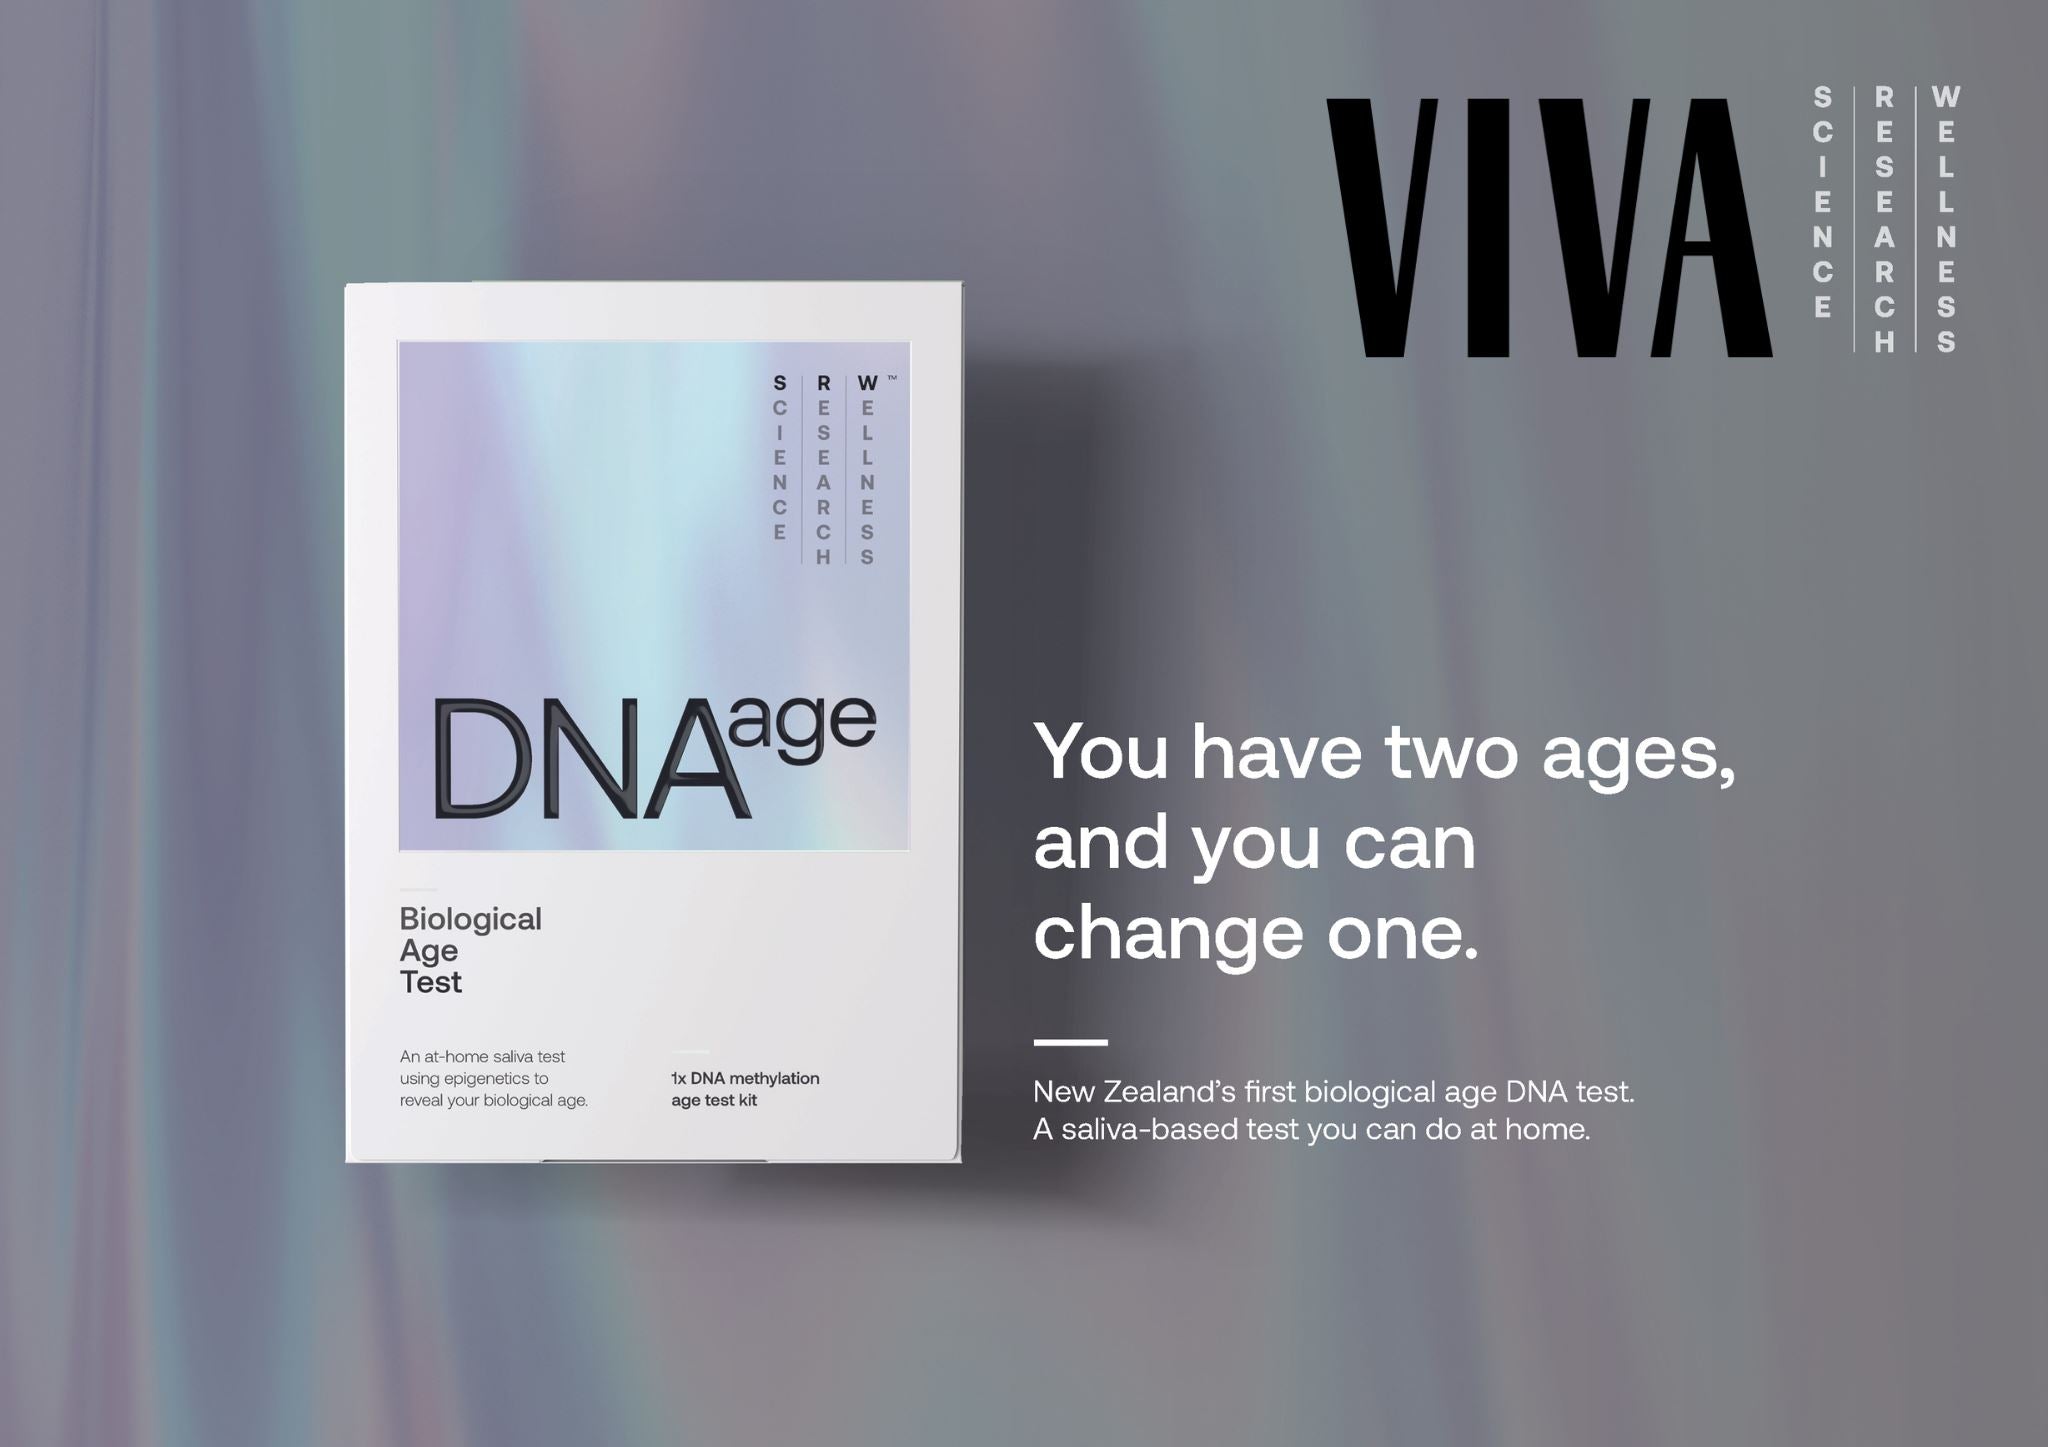 Think You're Ageing Well? There's A Test For That [VIVA]